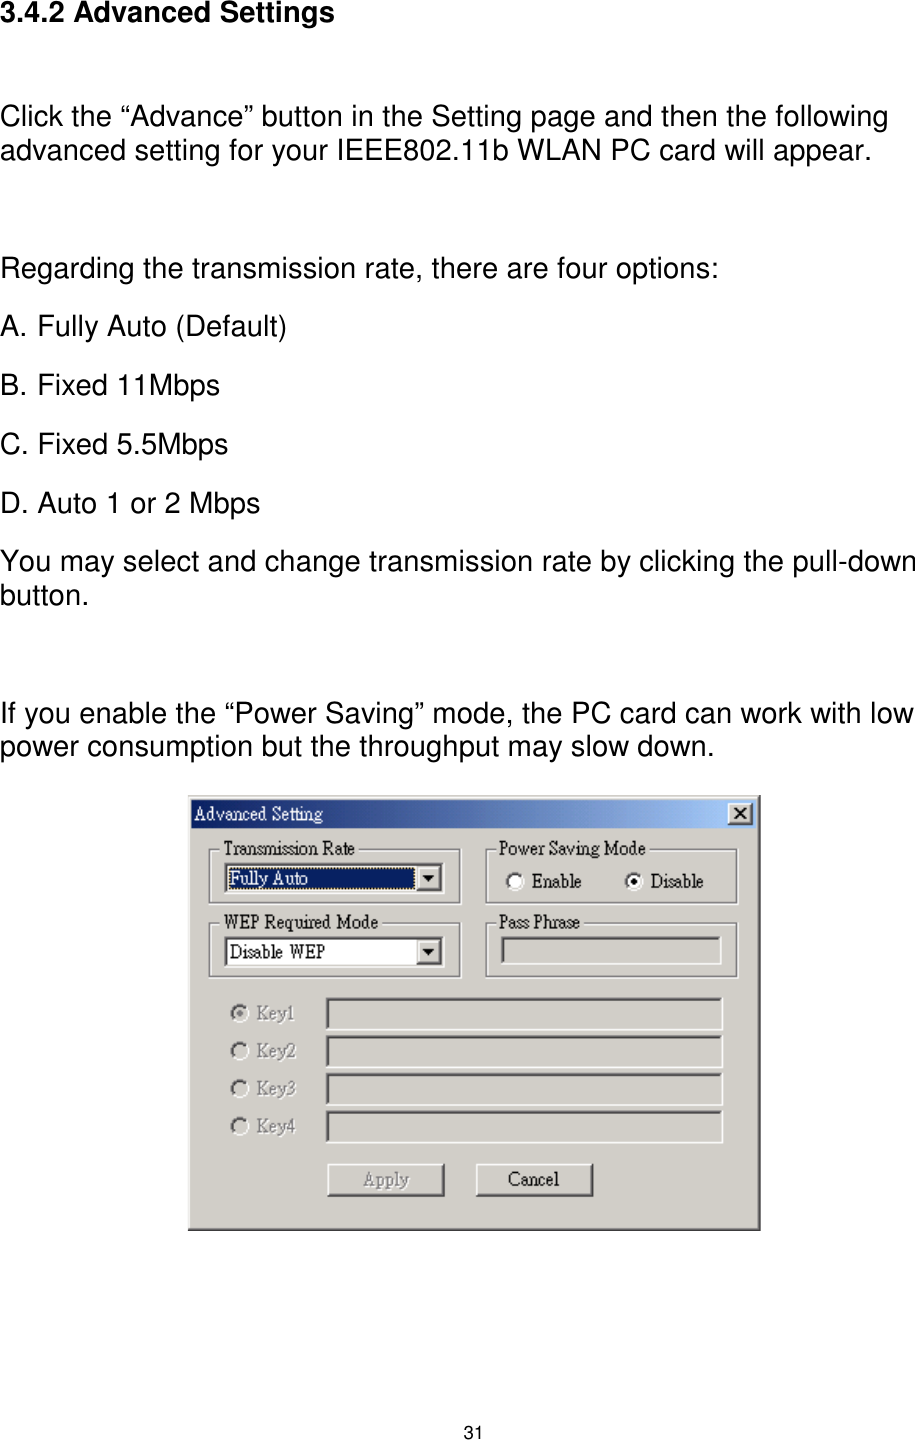  31  3.4.2 Advanced Settings  Click the “Advance” button in the Setting page and then the following advanced setting for your IEEE802.11b WLAN PC card will appear.  Regarding the transmission rate, there are four options: A. Fully Auto (Default) B. Fixed 11Mbps C. Fixed 5.5Mbps D. Auto 1 or 2 Mbps You may select and change transmission rate by clicking the pull-down button.  If you enable the “Power Saving” mode, the PC card can work with low power consumption but the throughput may slow down.               